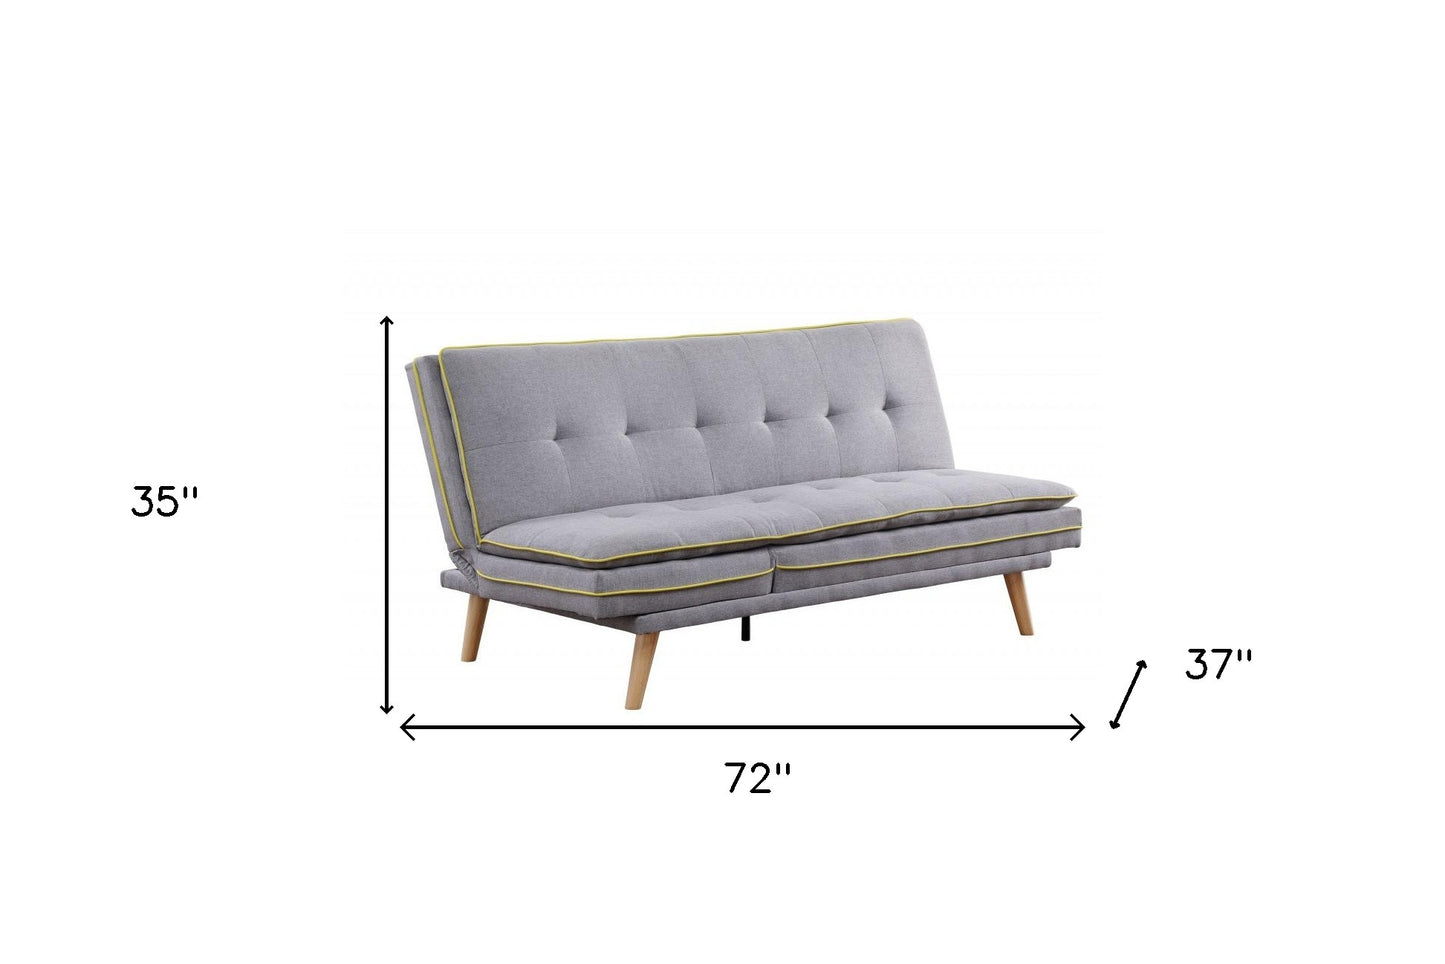 72" Gray Linen Sofa With Brown Legs